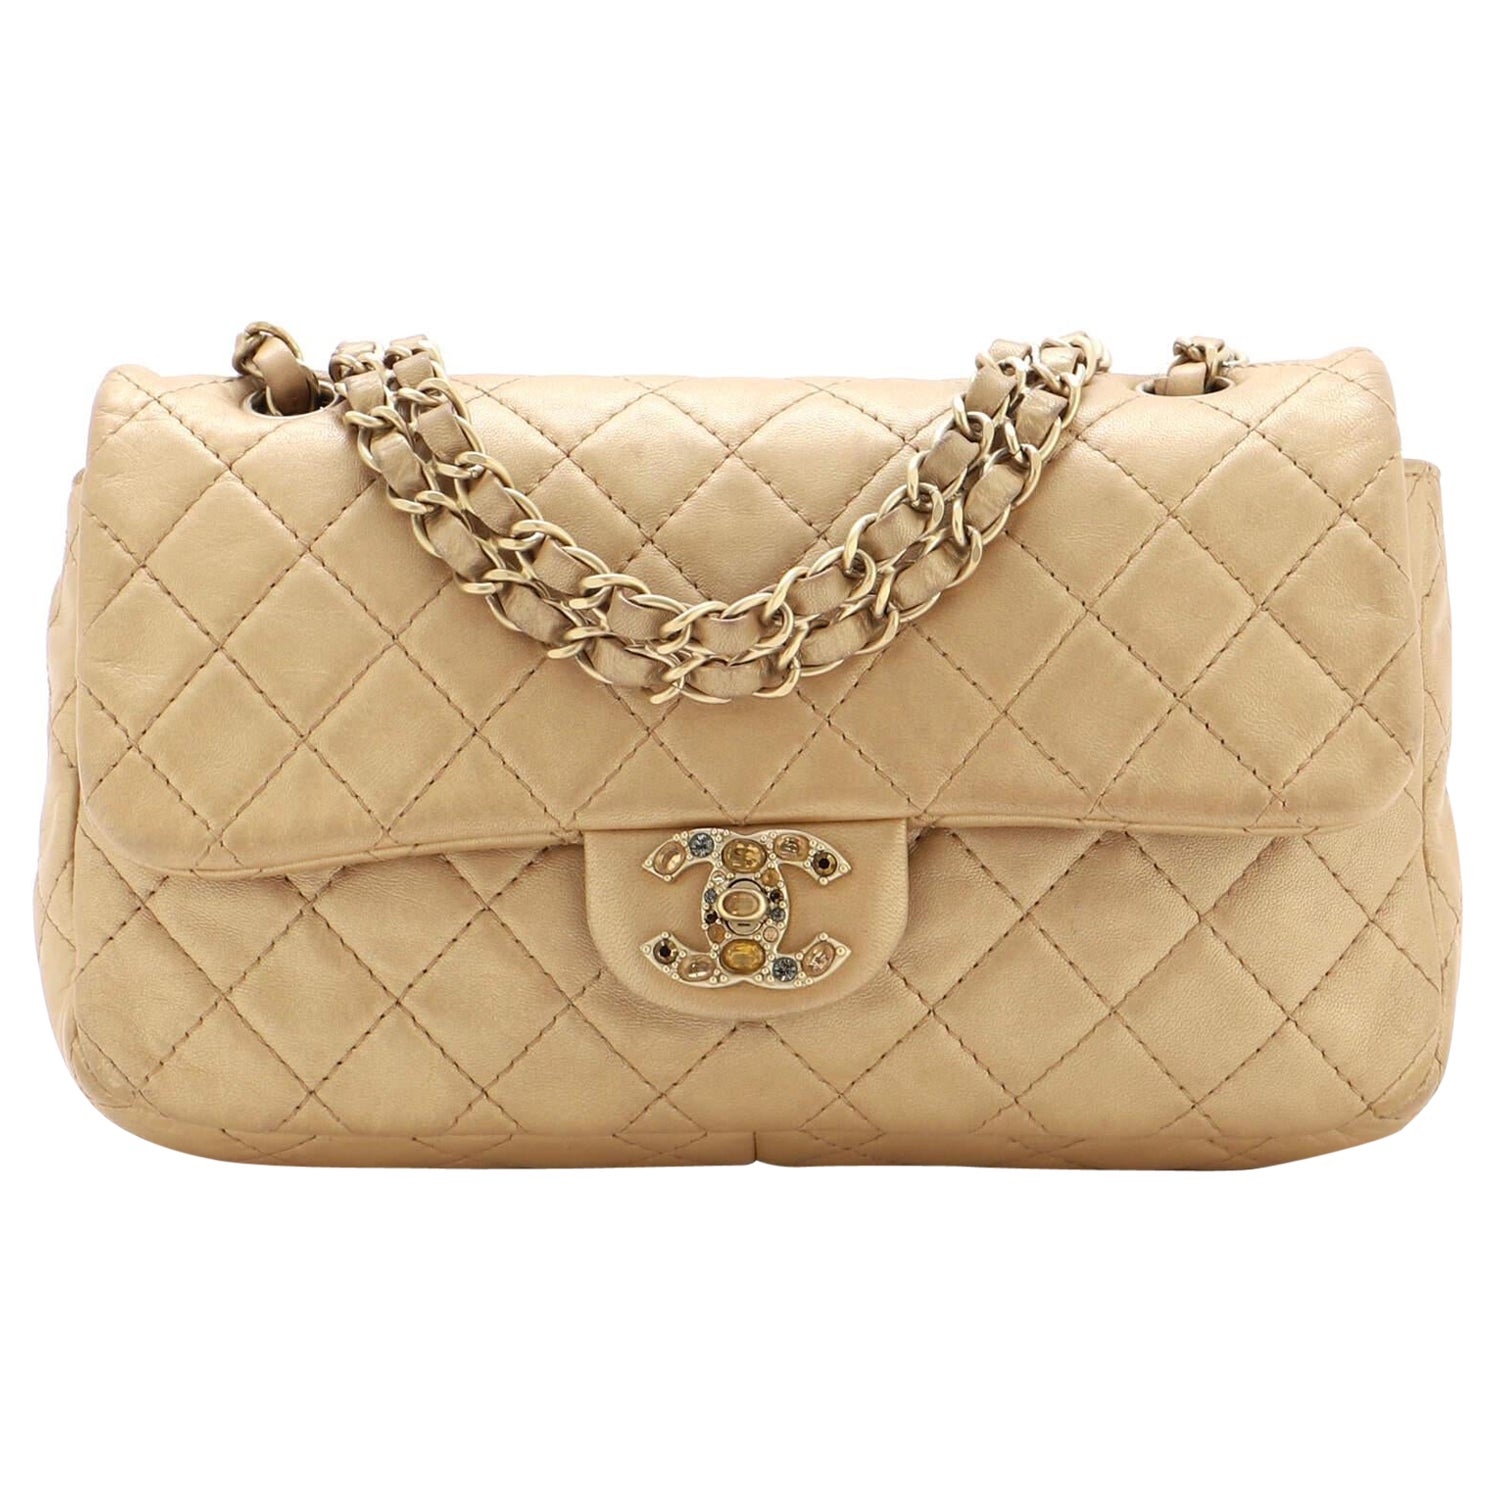 Chanel Precious Jewel Flap Bag Quilted Lambskin Medium For Sale